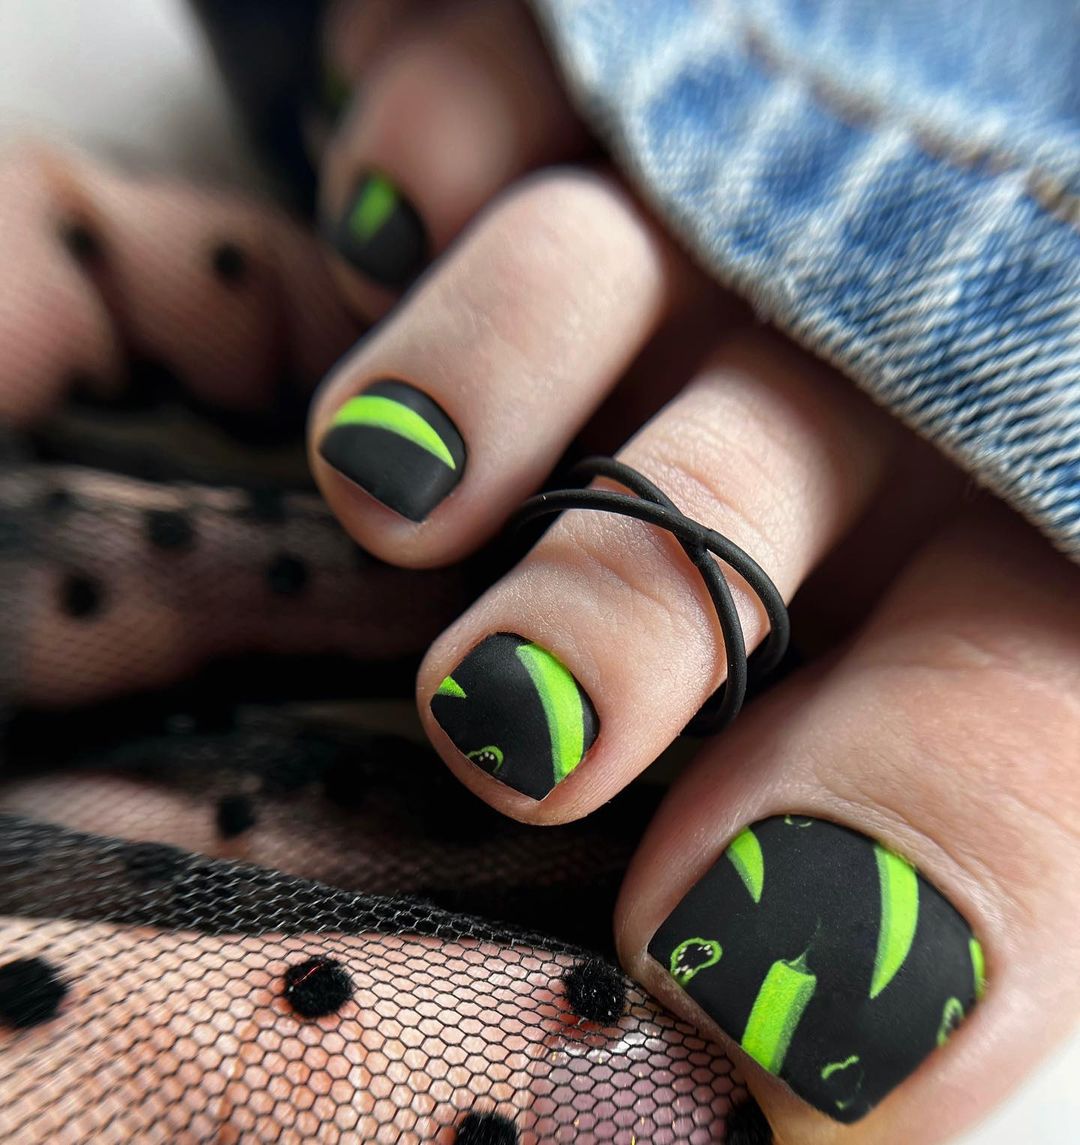 Dive into Summer Vibes: 29 Pedicure Designs to Make Your Toes Pop!